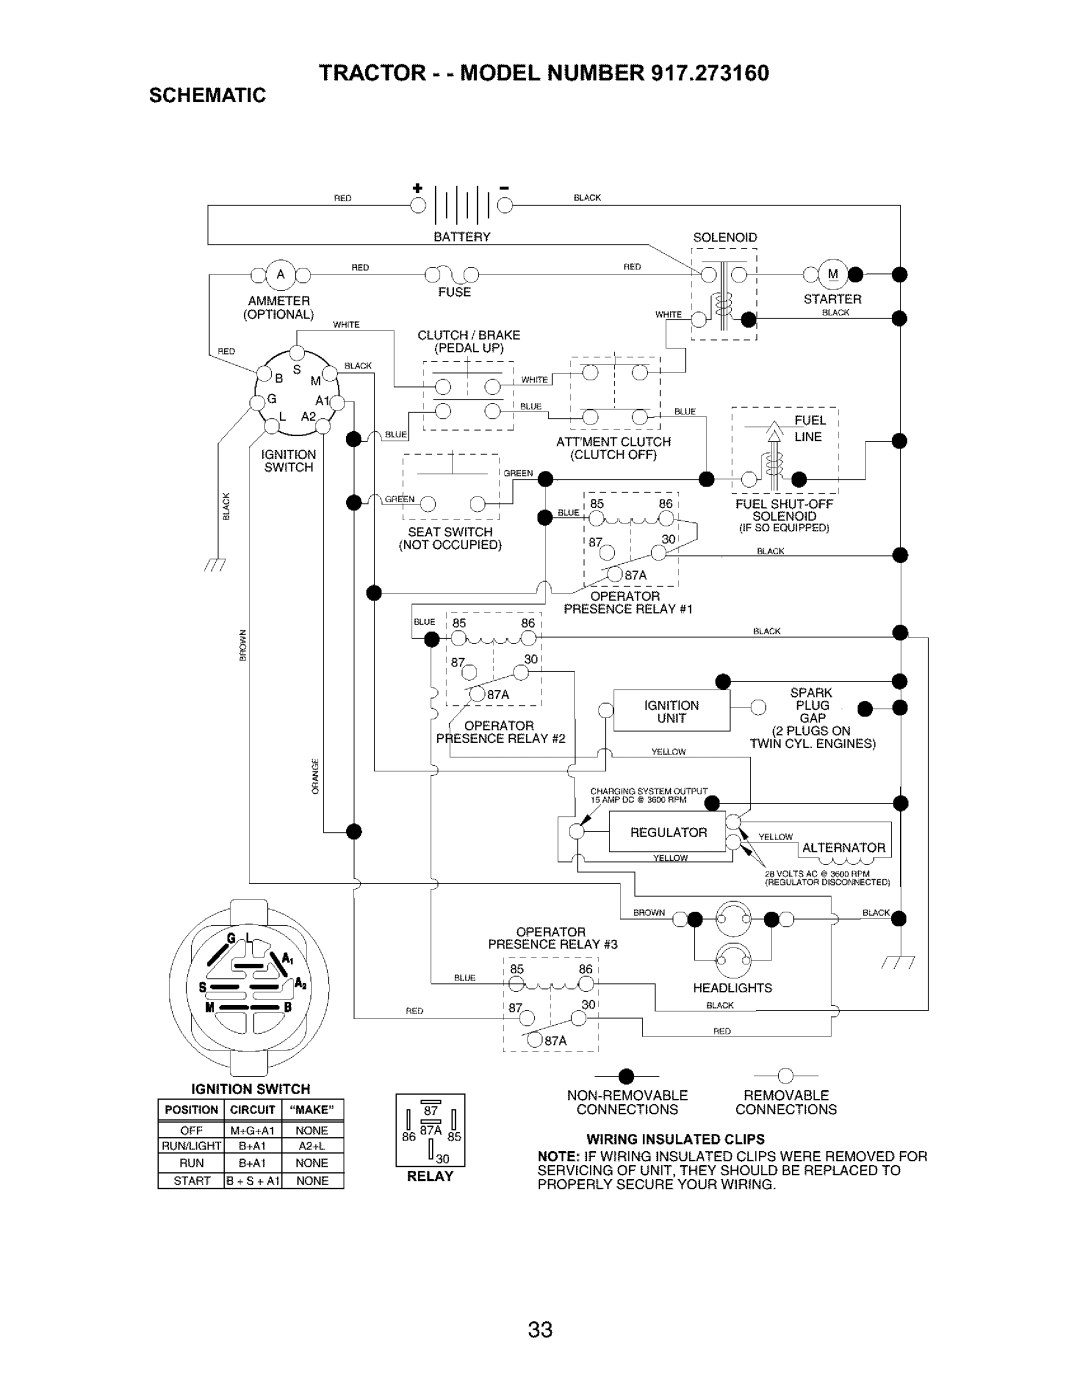 Craftsman 917.27316 owner manual Redlack, o_o_, BLO0W_, Tractor - - Model Number Schematic, Wiring Insulated Clips 